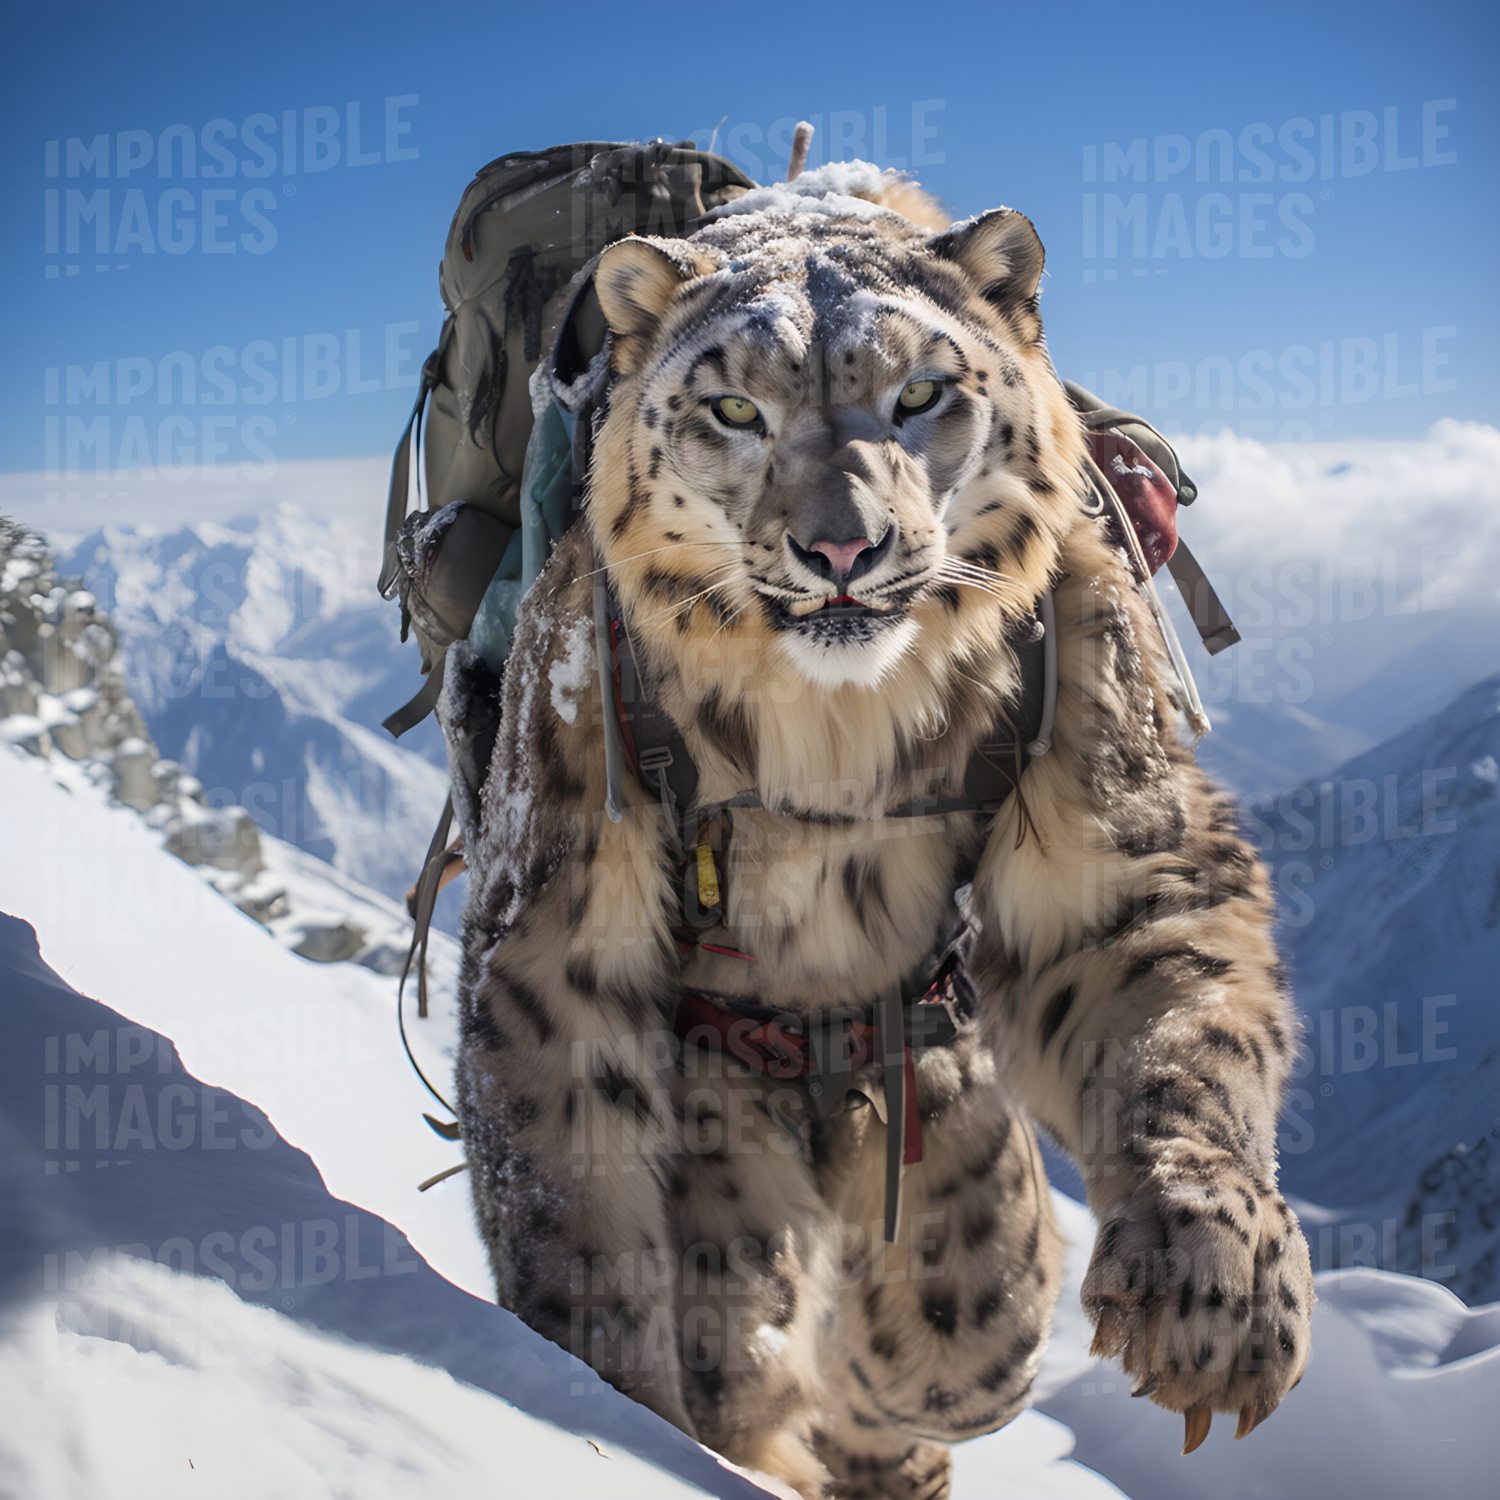 Anthopormorphic snow leopard exploring the mountains -  A snow leopard embarks on an adventure, exploring the majestic mountains, discovering the beauty of the wild.